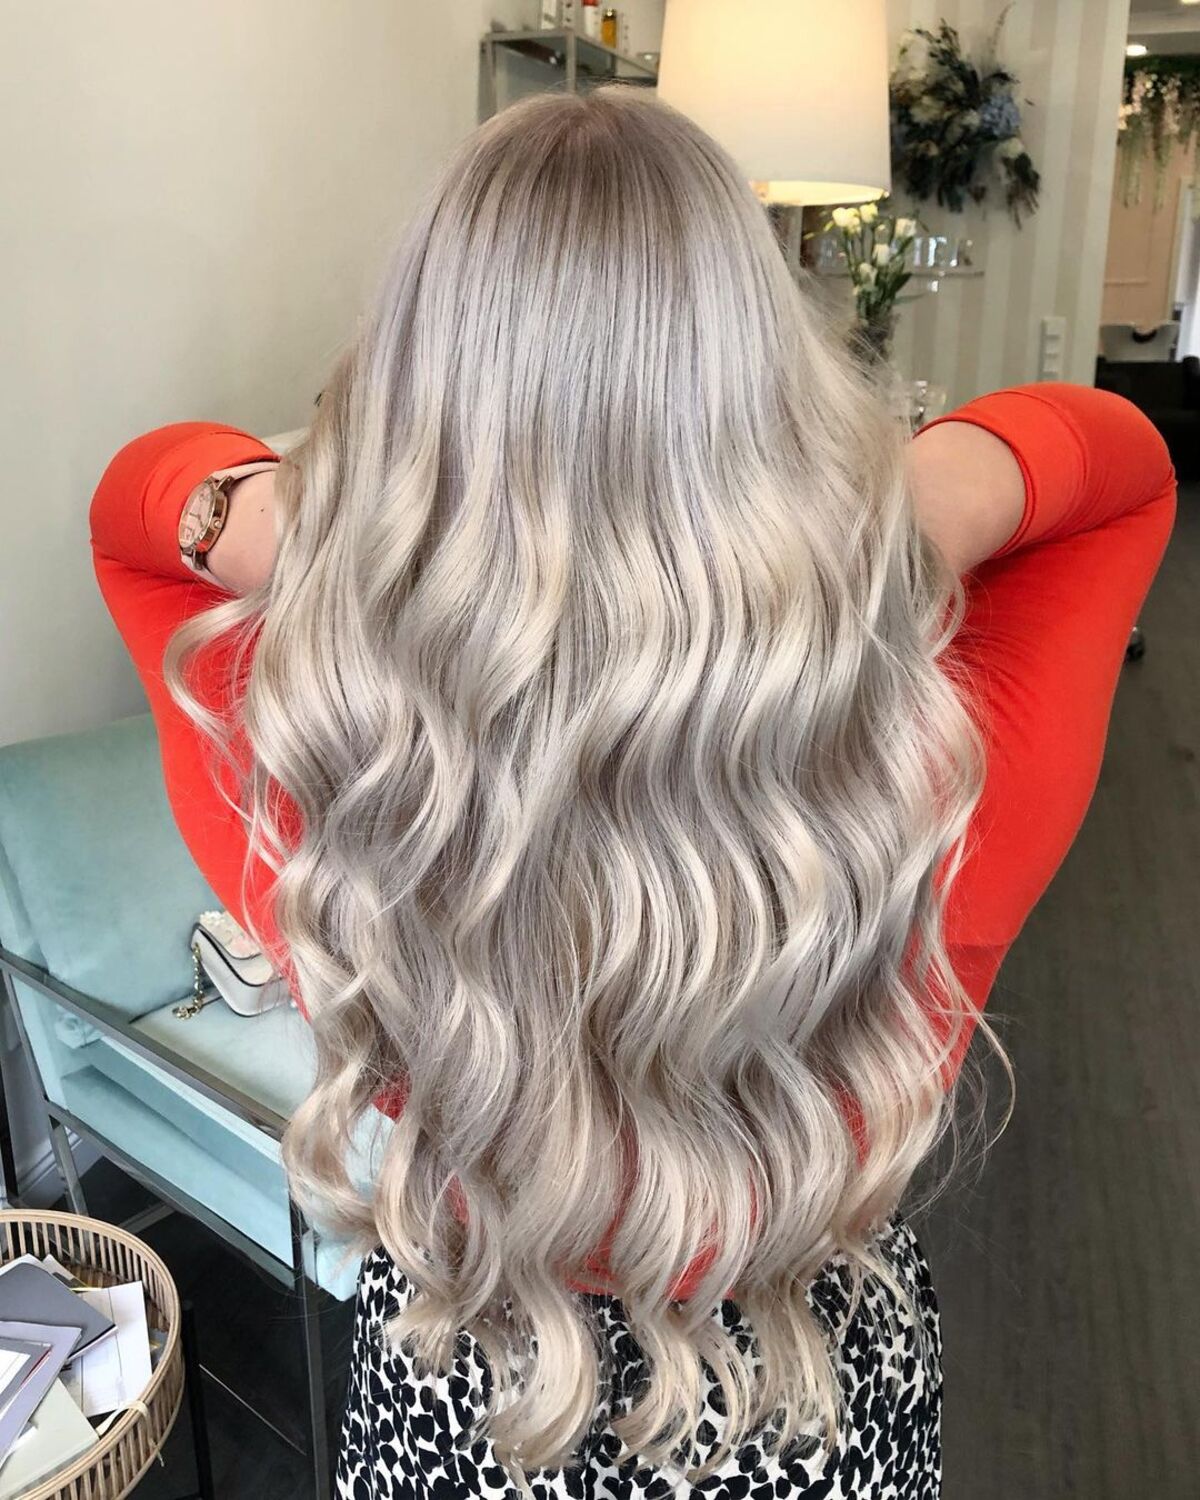 23 Best Champagne Blonde Hair Color Ideas for Every Skin Tone